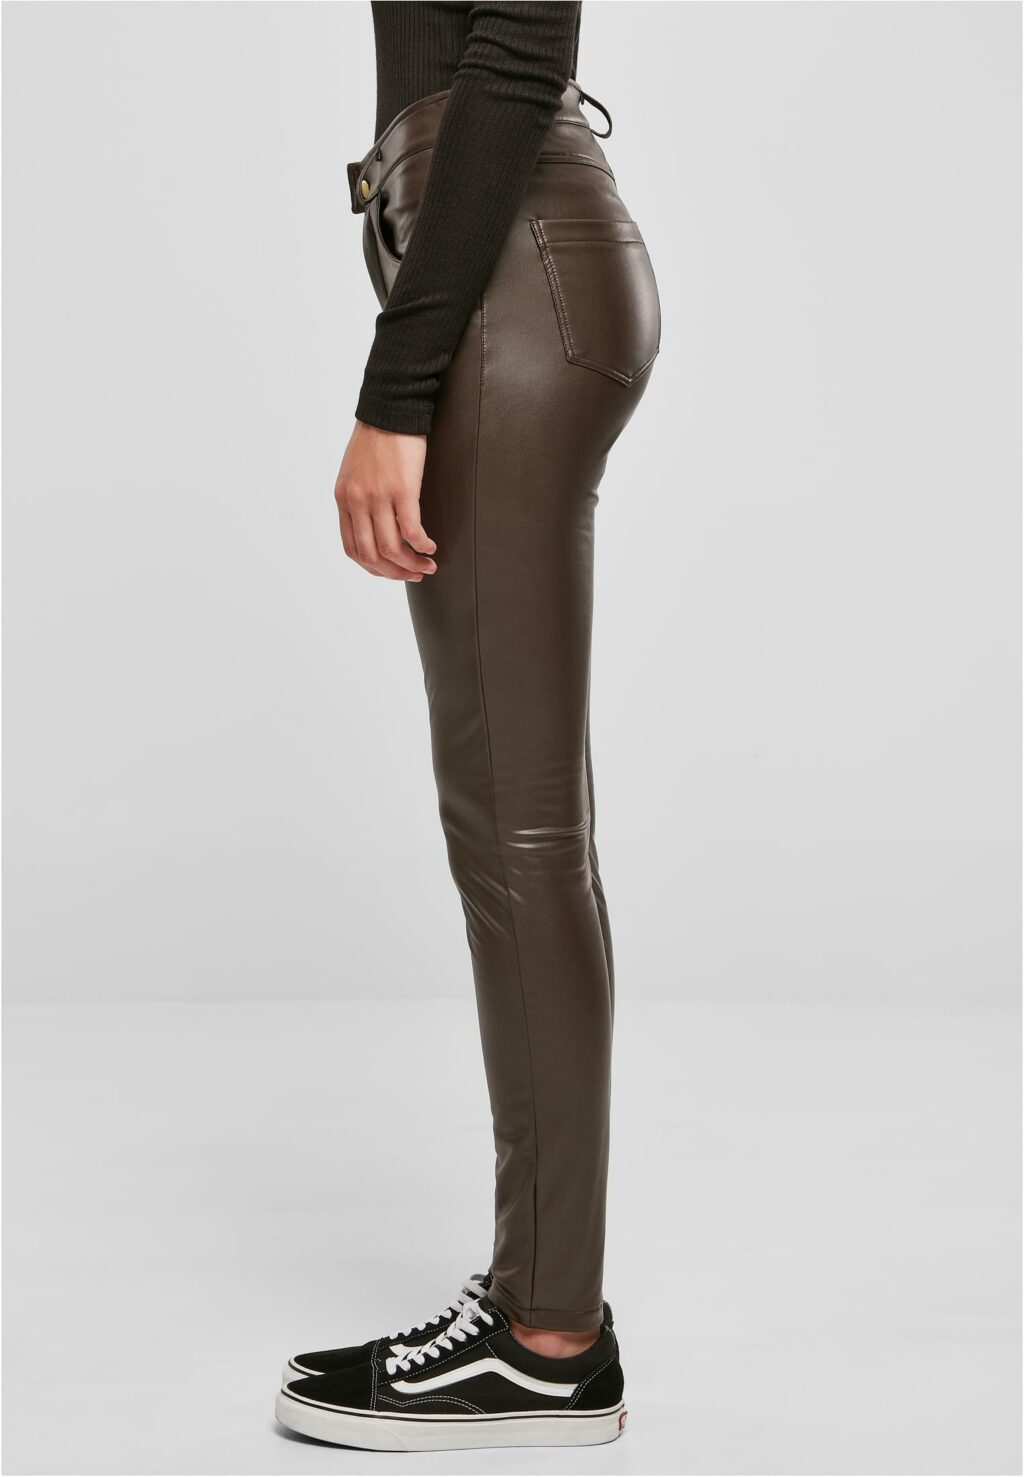 Urban Classics Ladies Mid Waist Synthetic Leather Pants brown TB5455